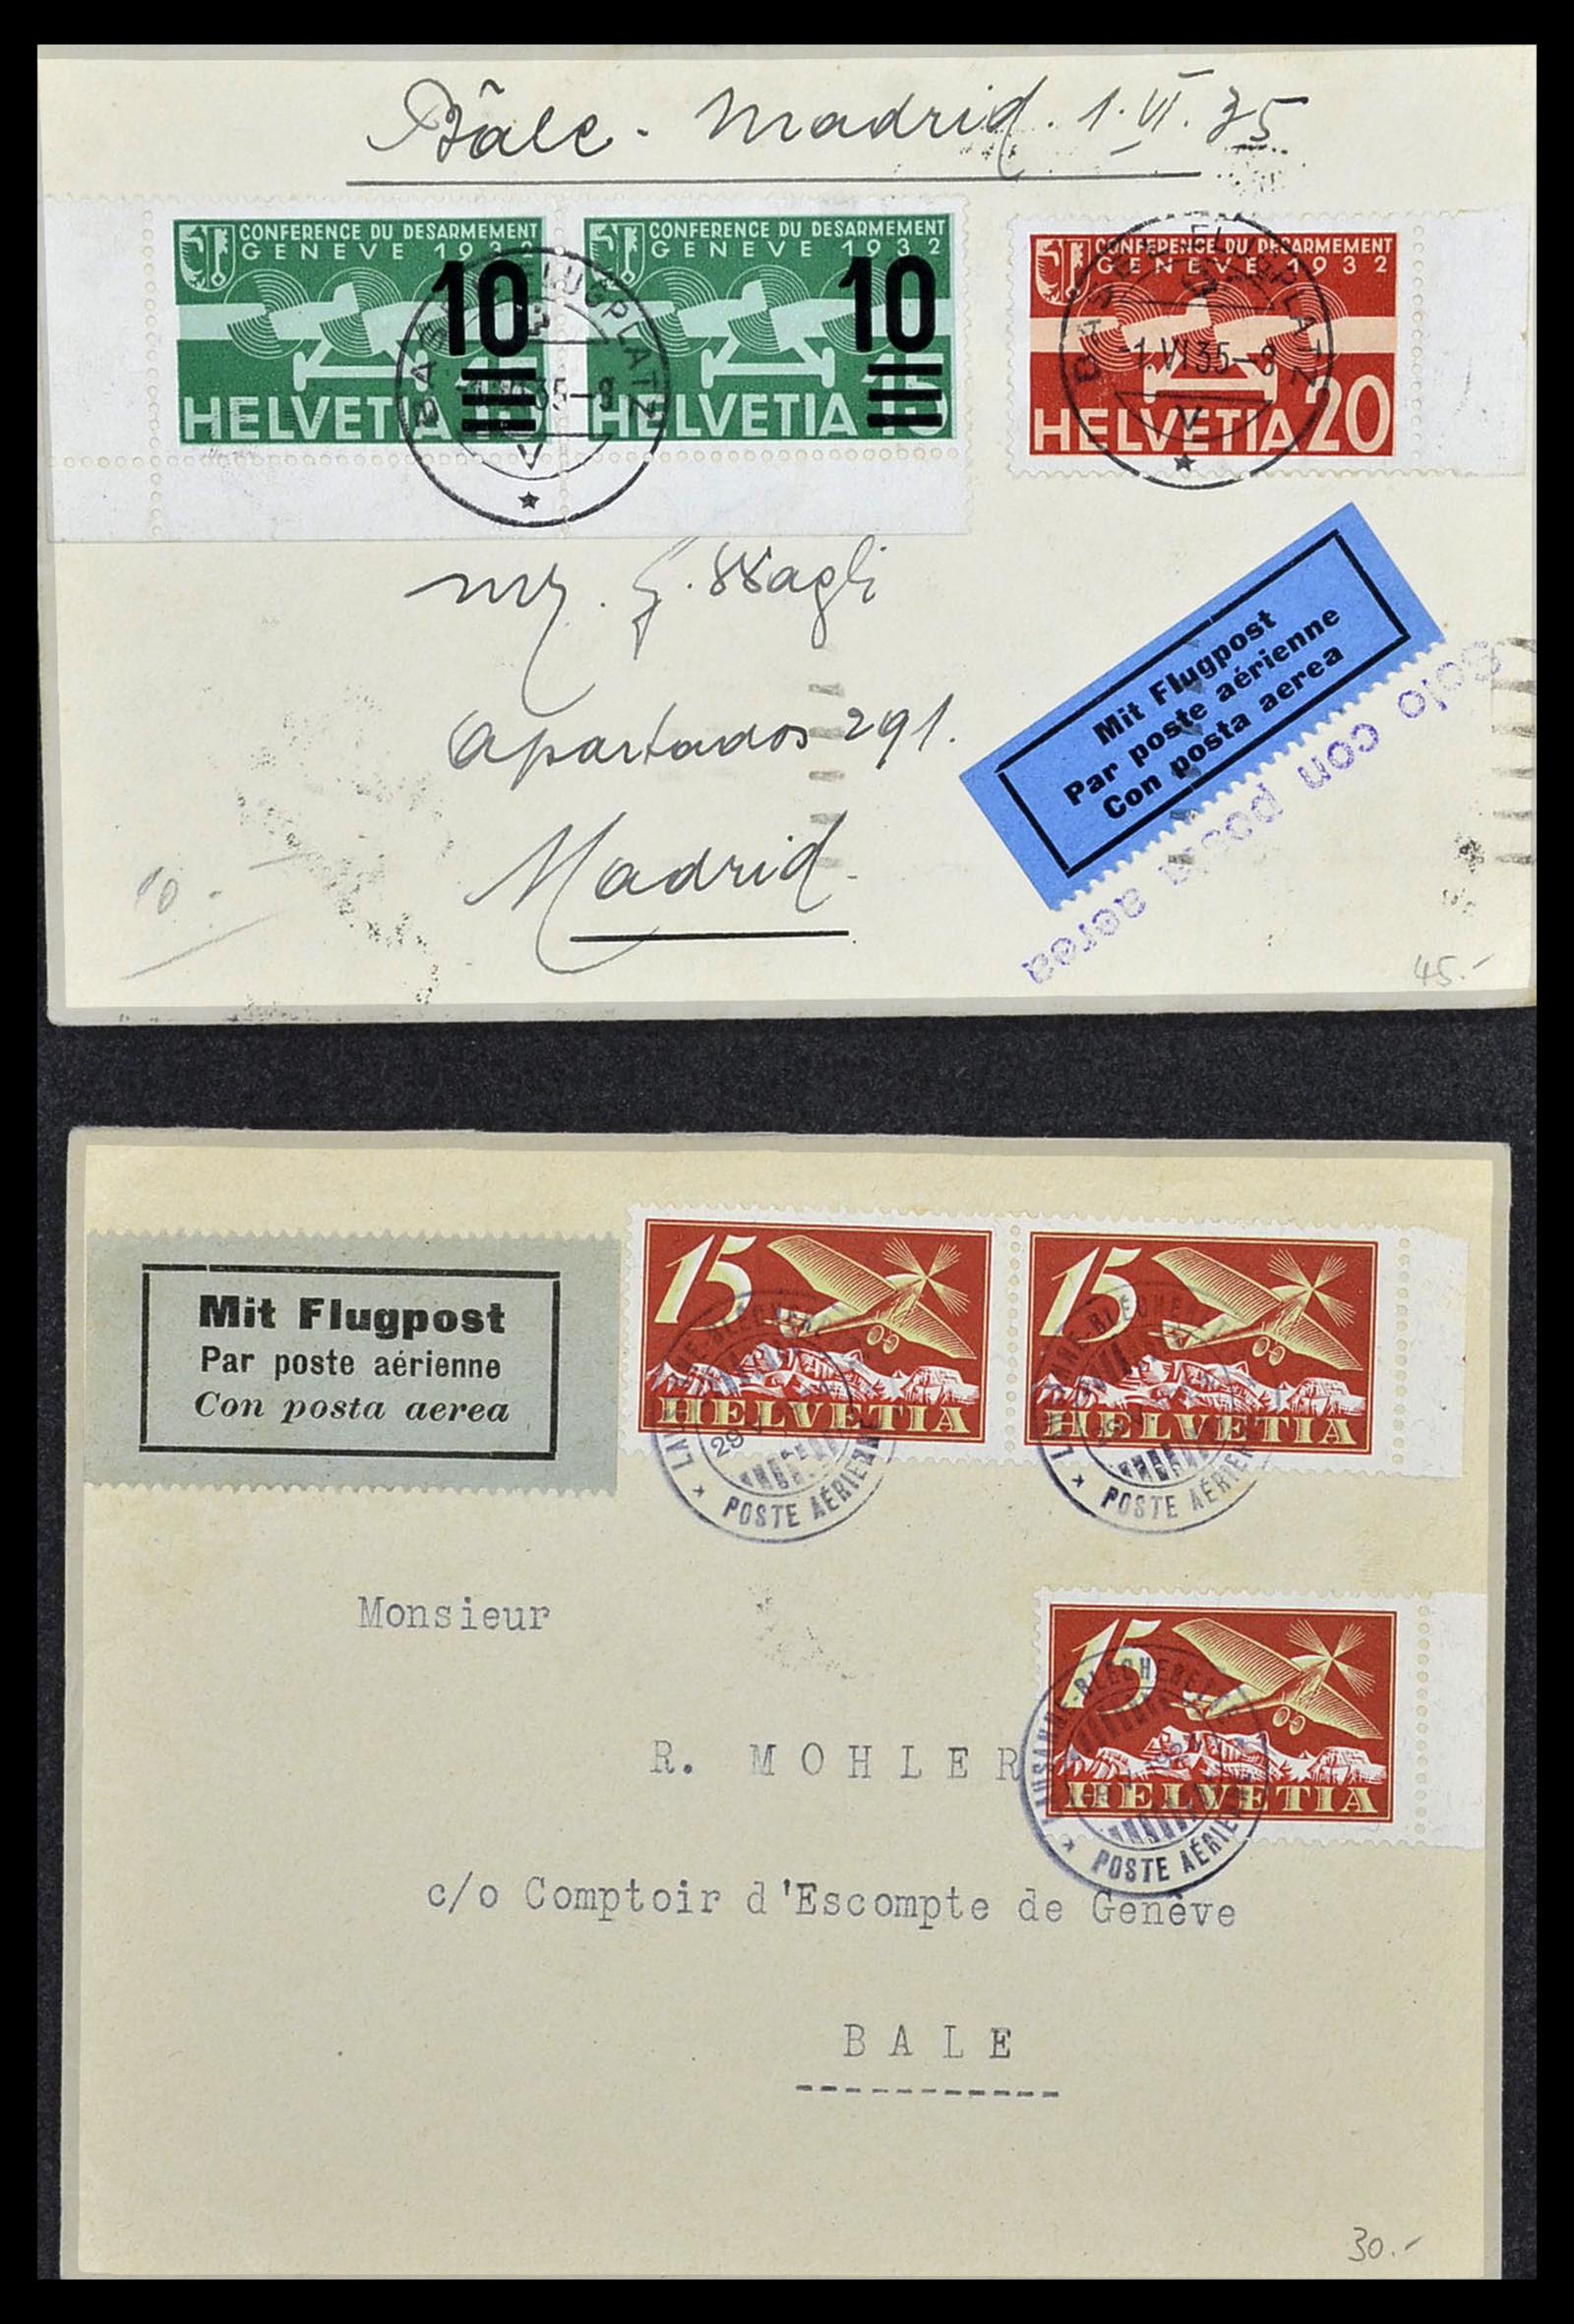 34141 025 - Stamp collection 34141 Switzerland airmail covers 1920-1960.